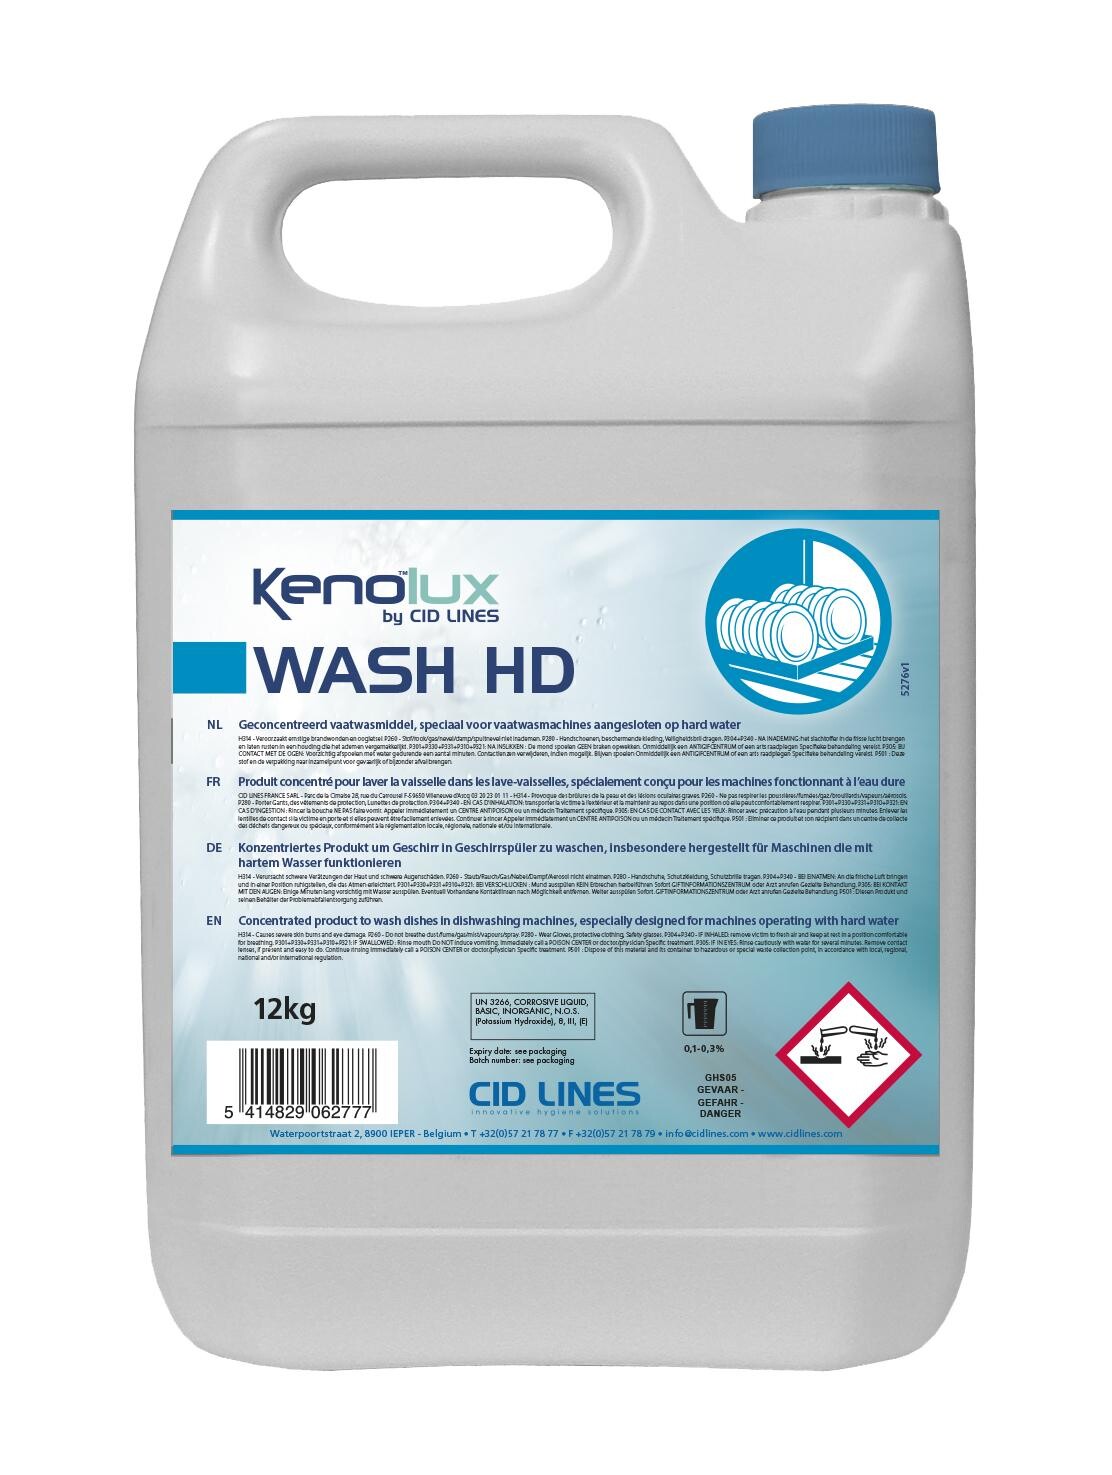 Kenolux Wash HD 12kg liquid cleaning product for automated dishwashers with hard water Cid Lines